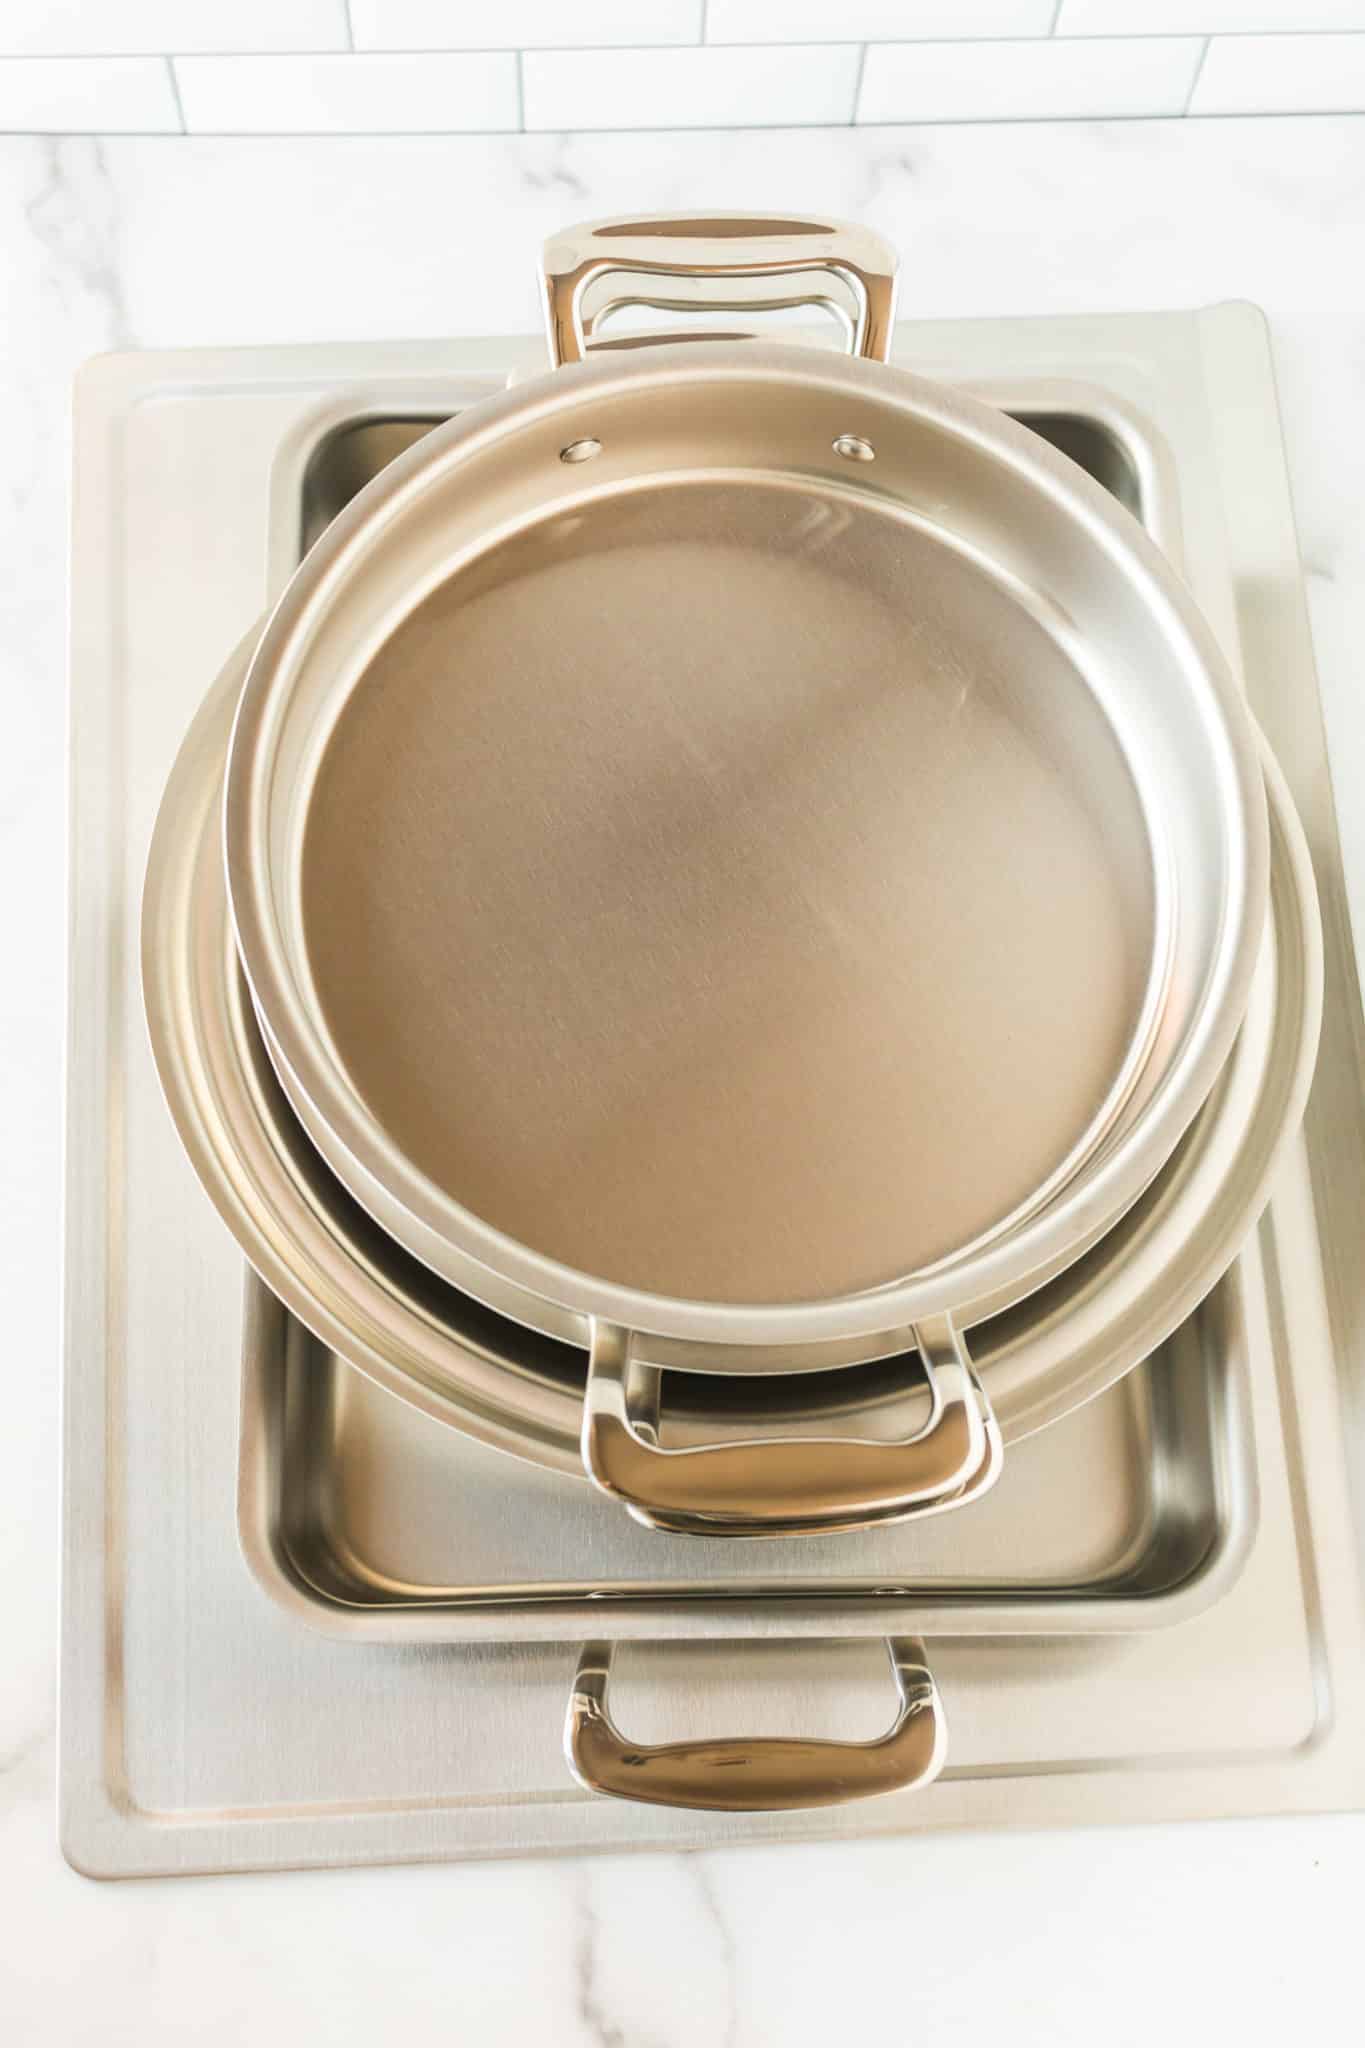 Stainless steel bakeware set made by 360 Cookware on a countertop.